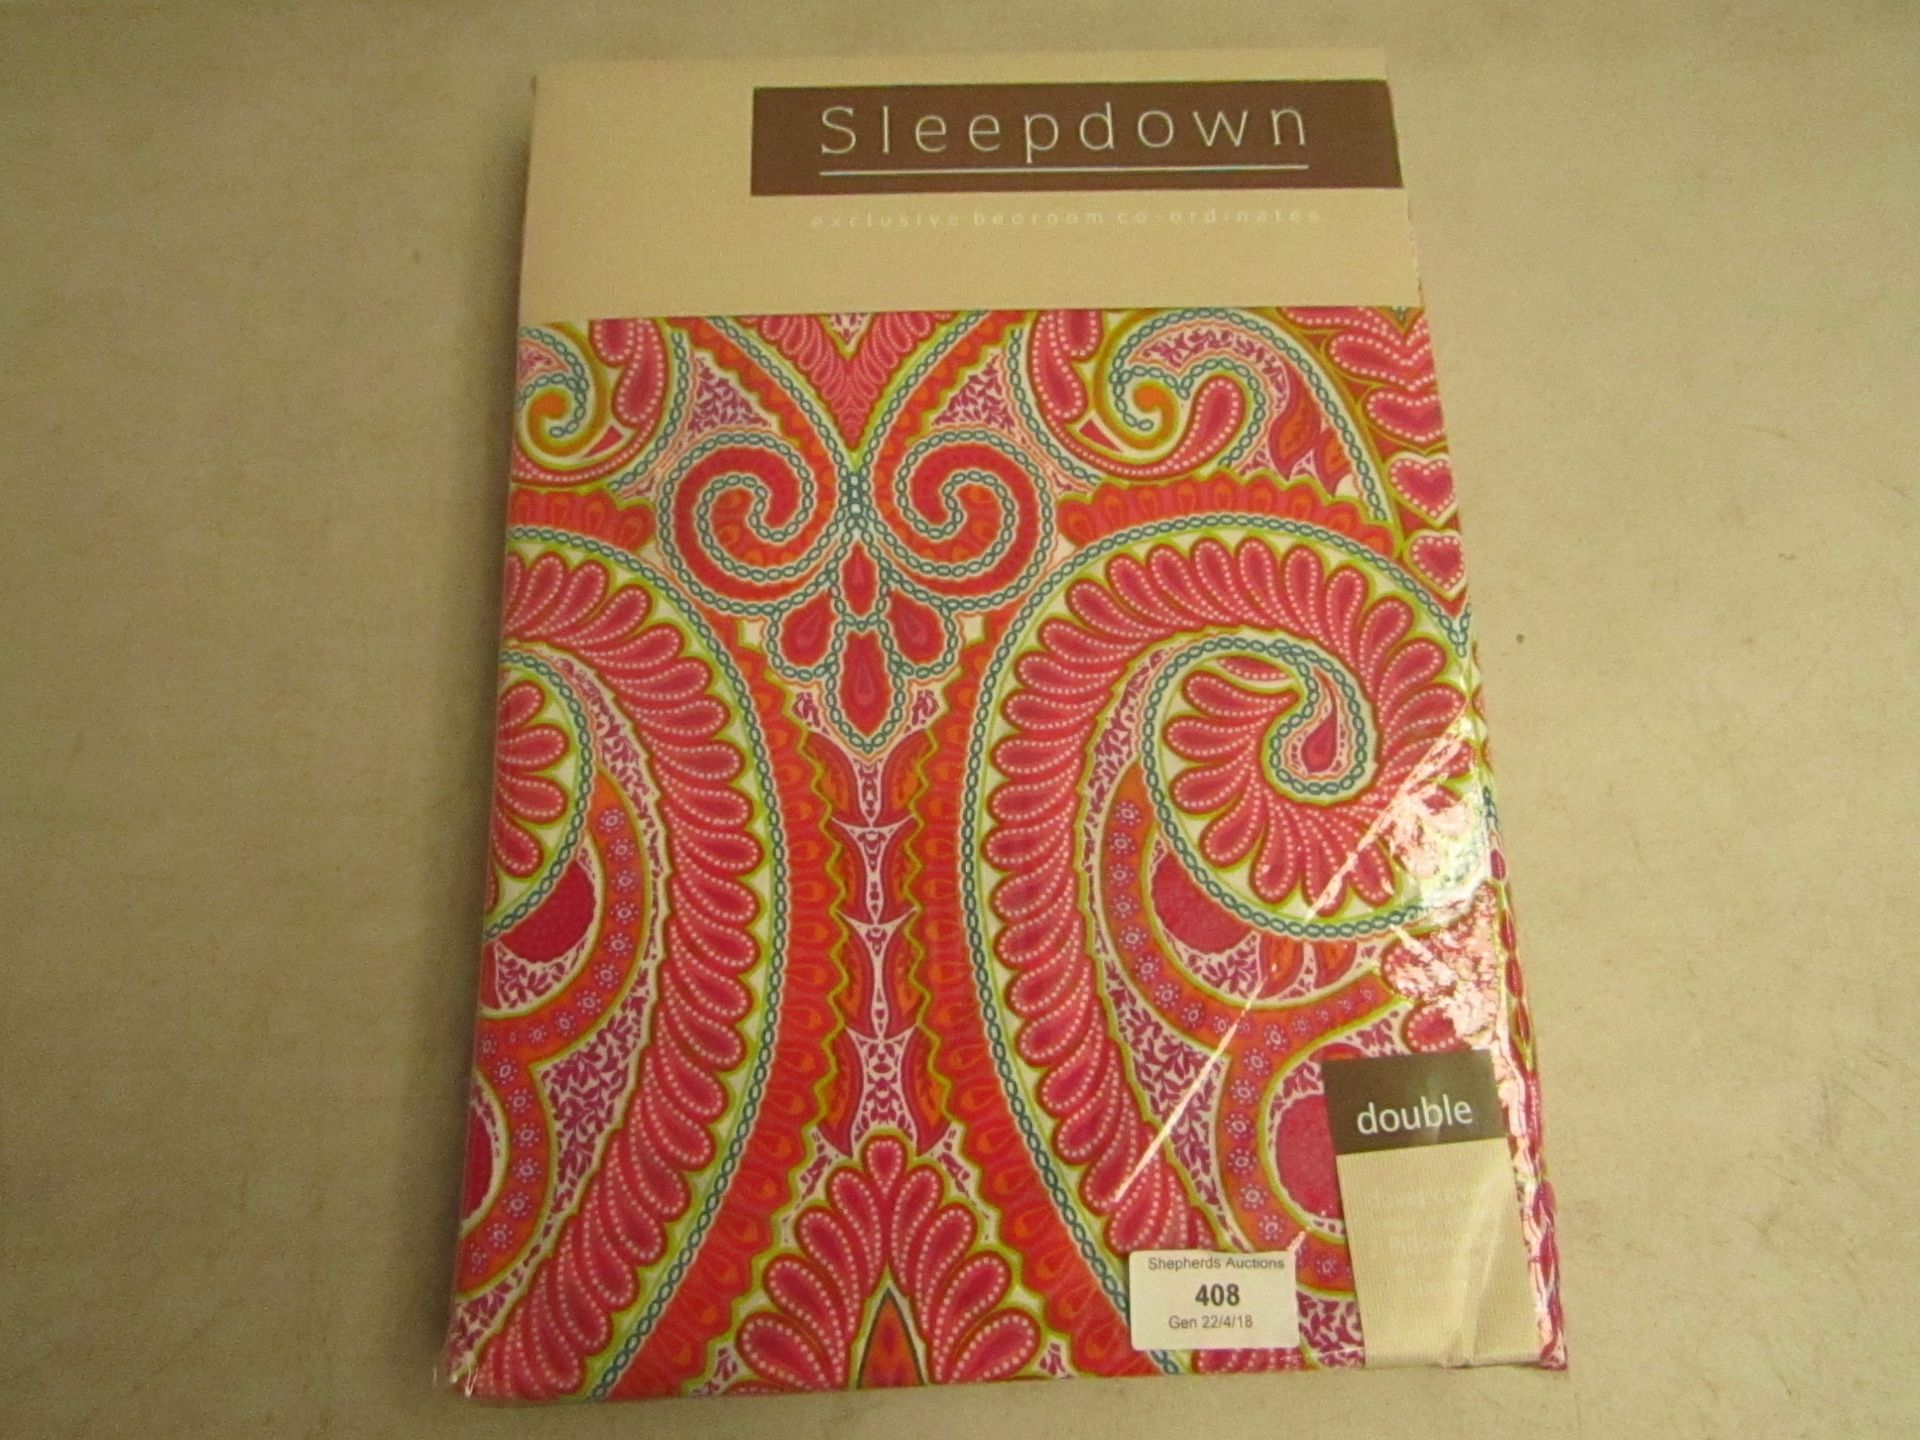 Sleepdown double duvet cover with 2x pillowcases, brand new and packaged. Please see picture for